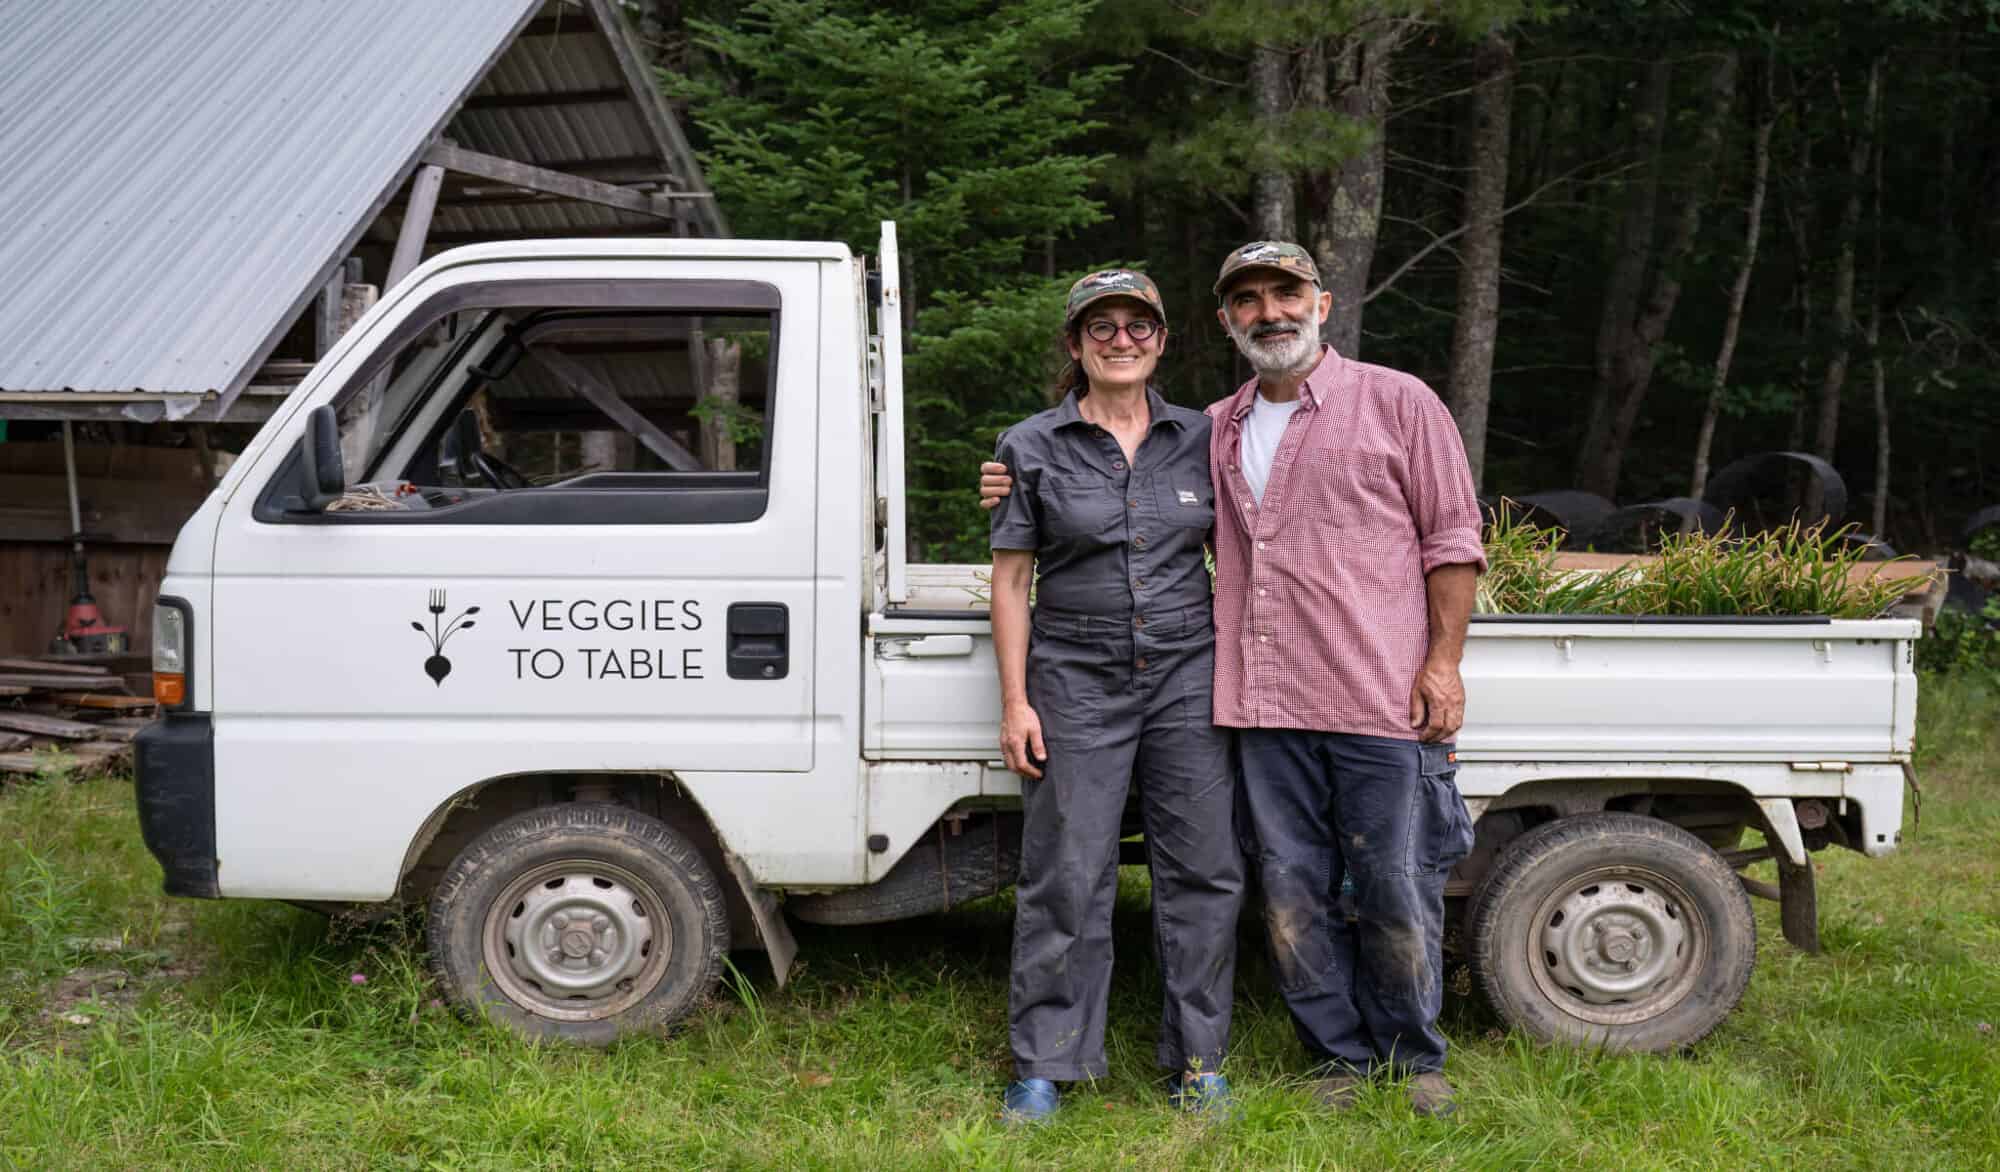 Erica Berman & Alain Ollier stand in front of a truck at Veggies to Table, Maine